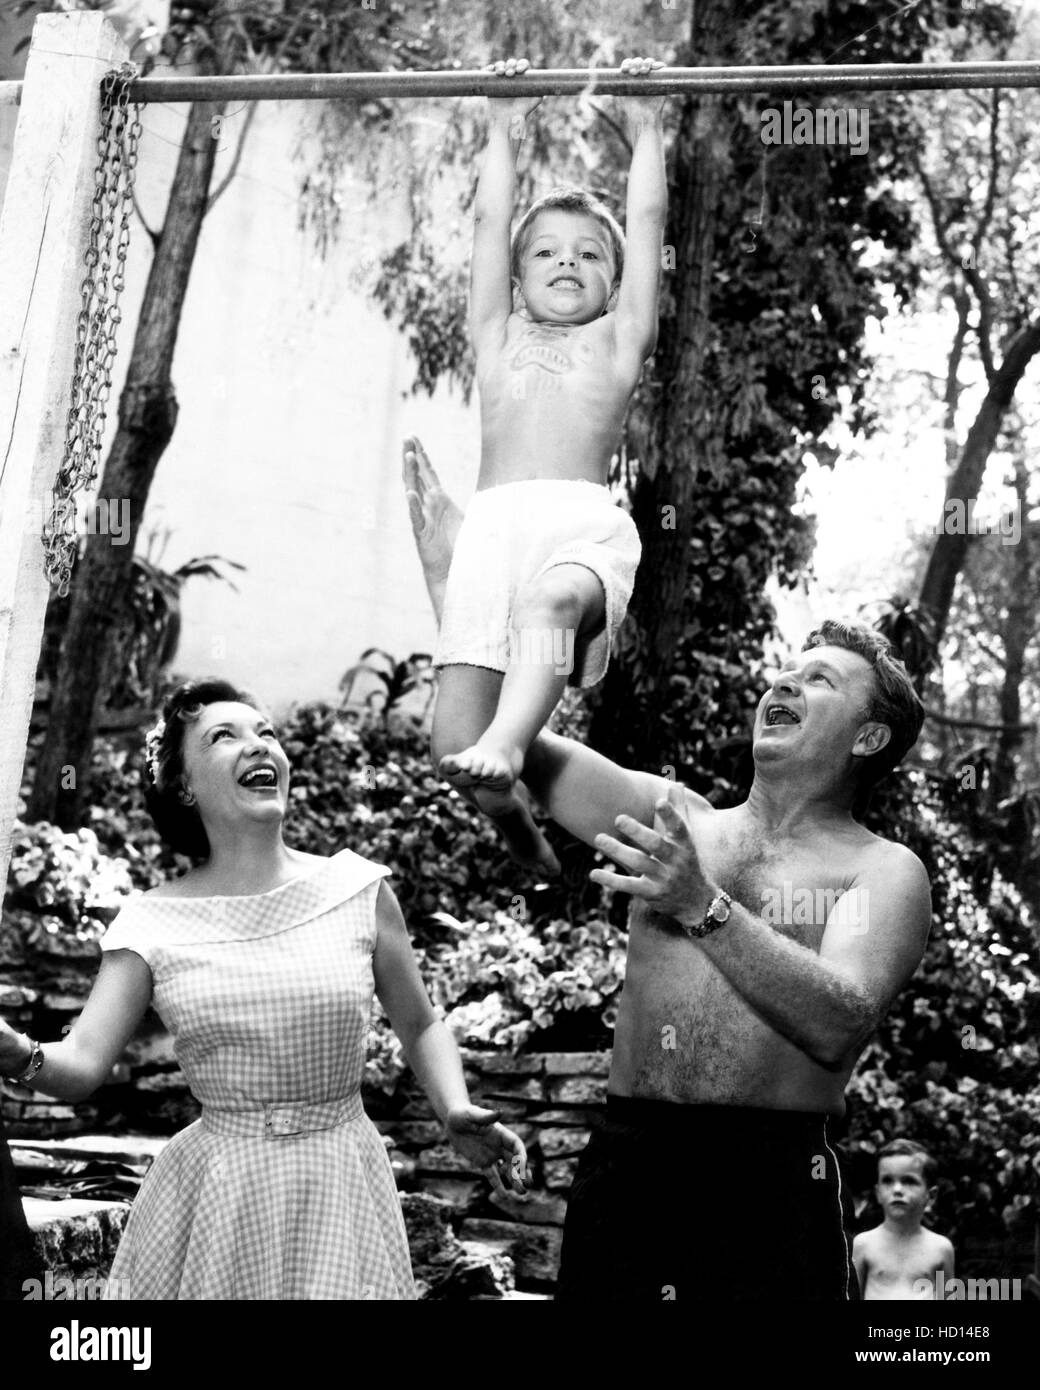 Eddie Albert Right And His Wife Margo Aka Margo Albert With Son Eddie Albert Jr Aka 